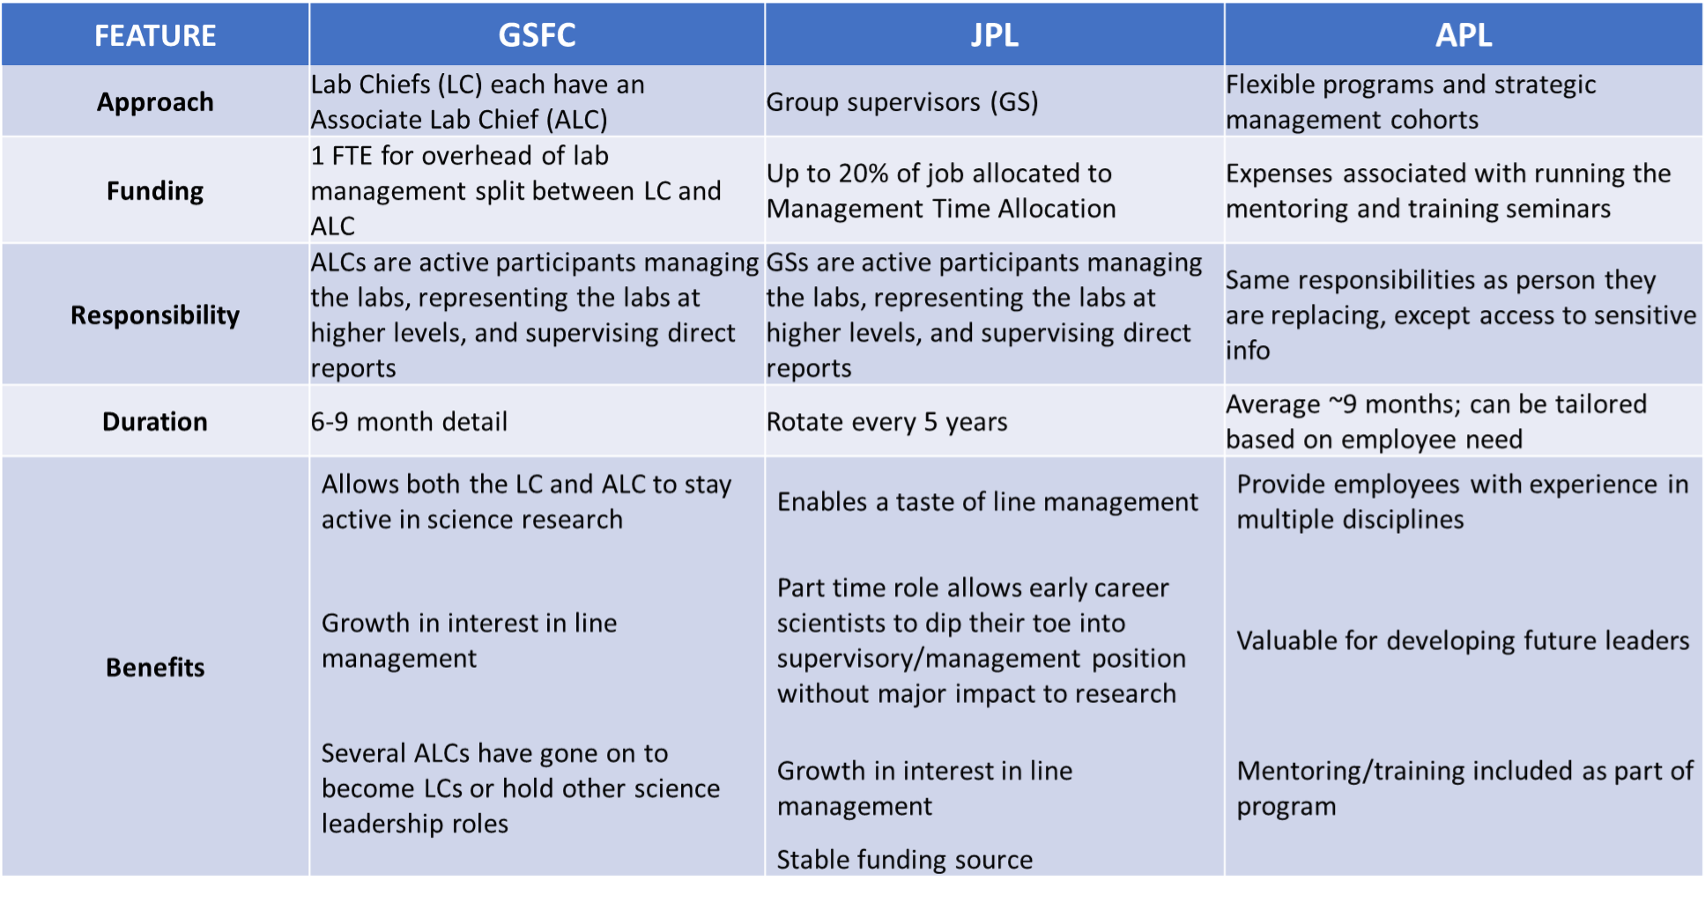 Table for four column headers: Feature, GSFC, JPL, and APL. There are 5 rows of data with the following headers: approach, funding, responsibility, duration, benefits